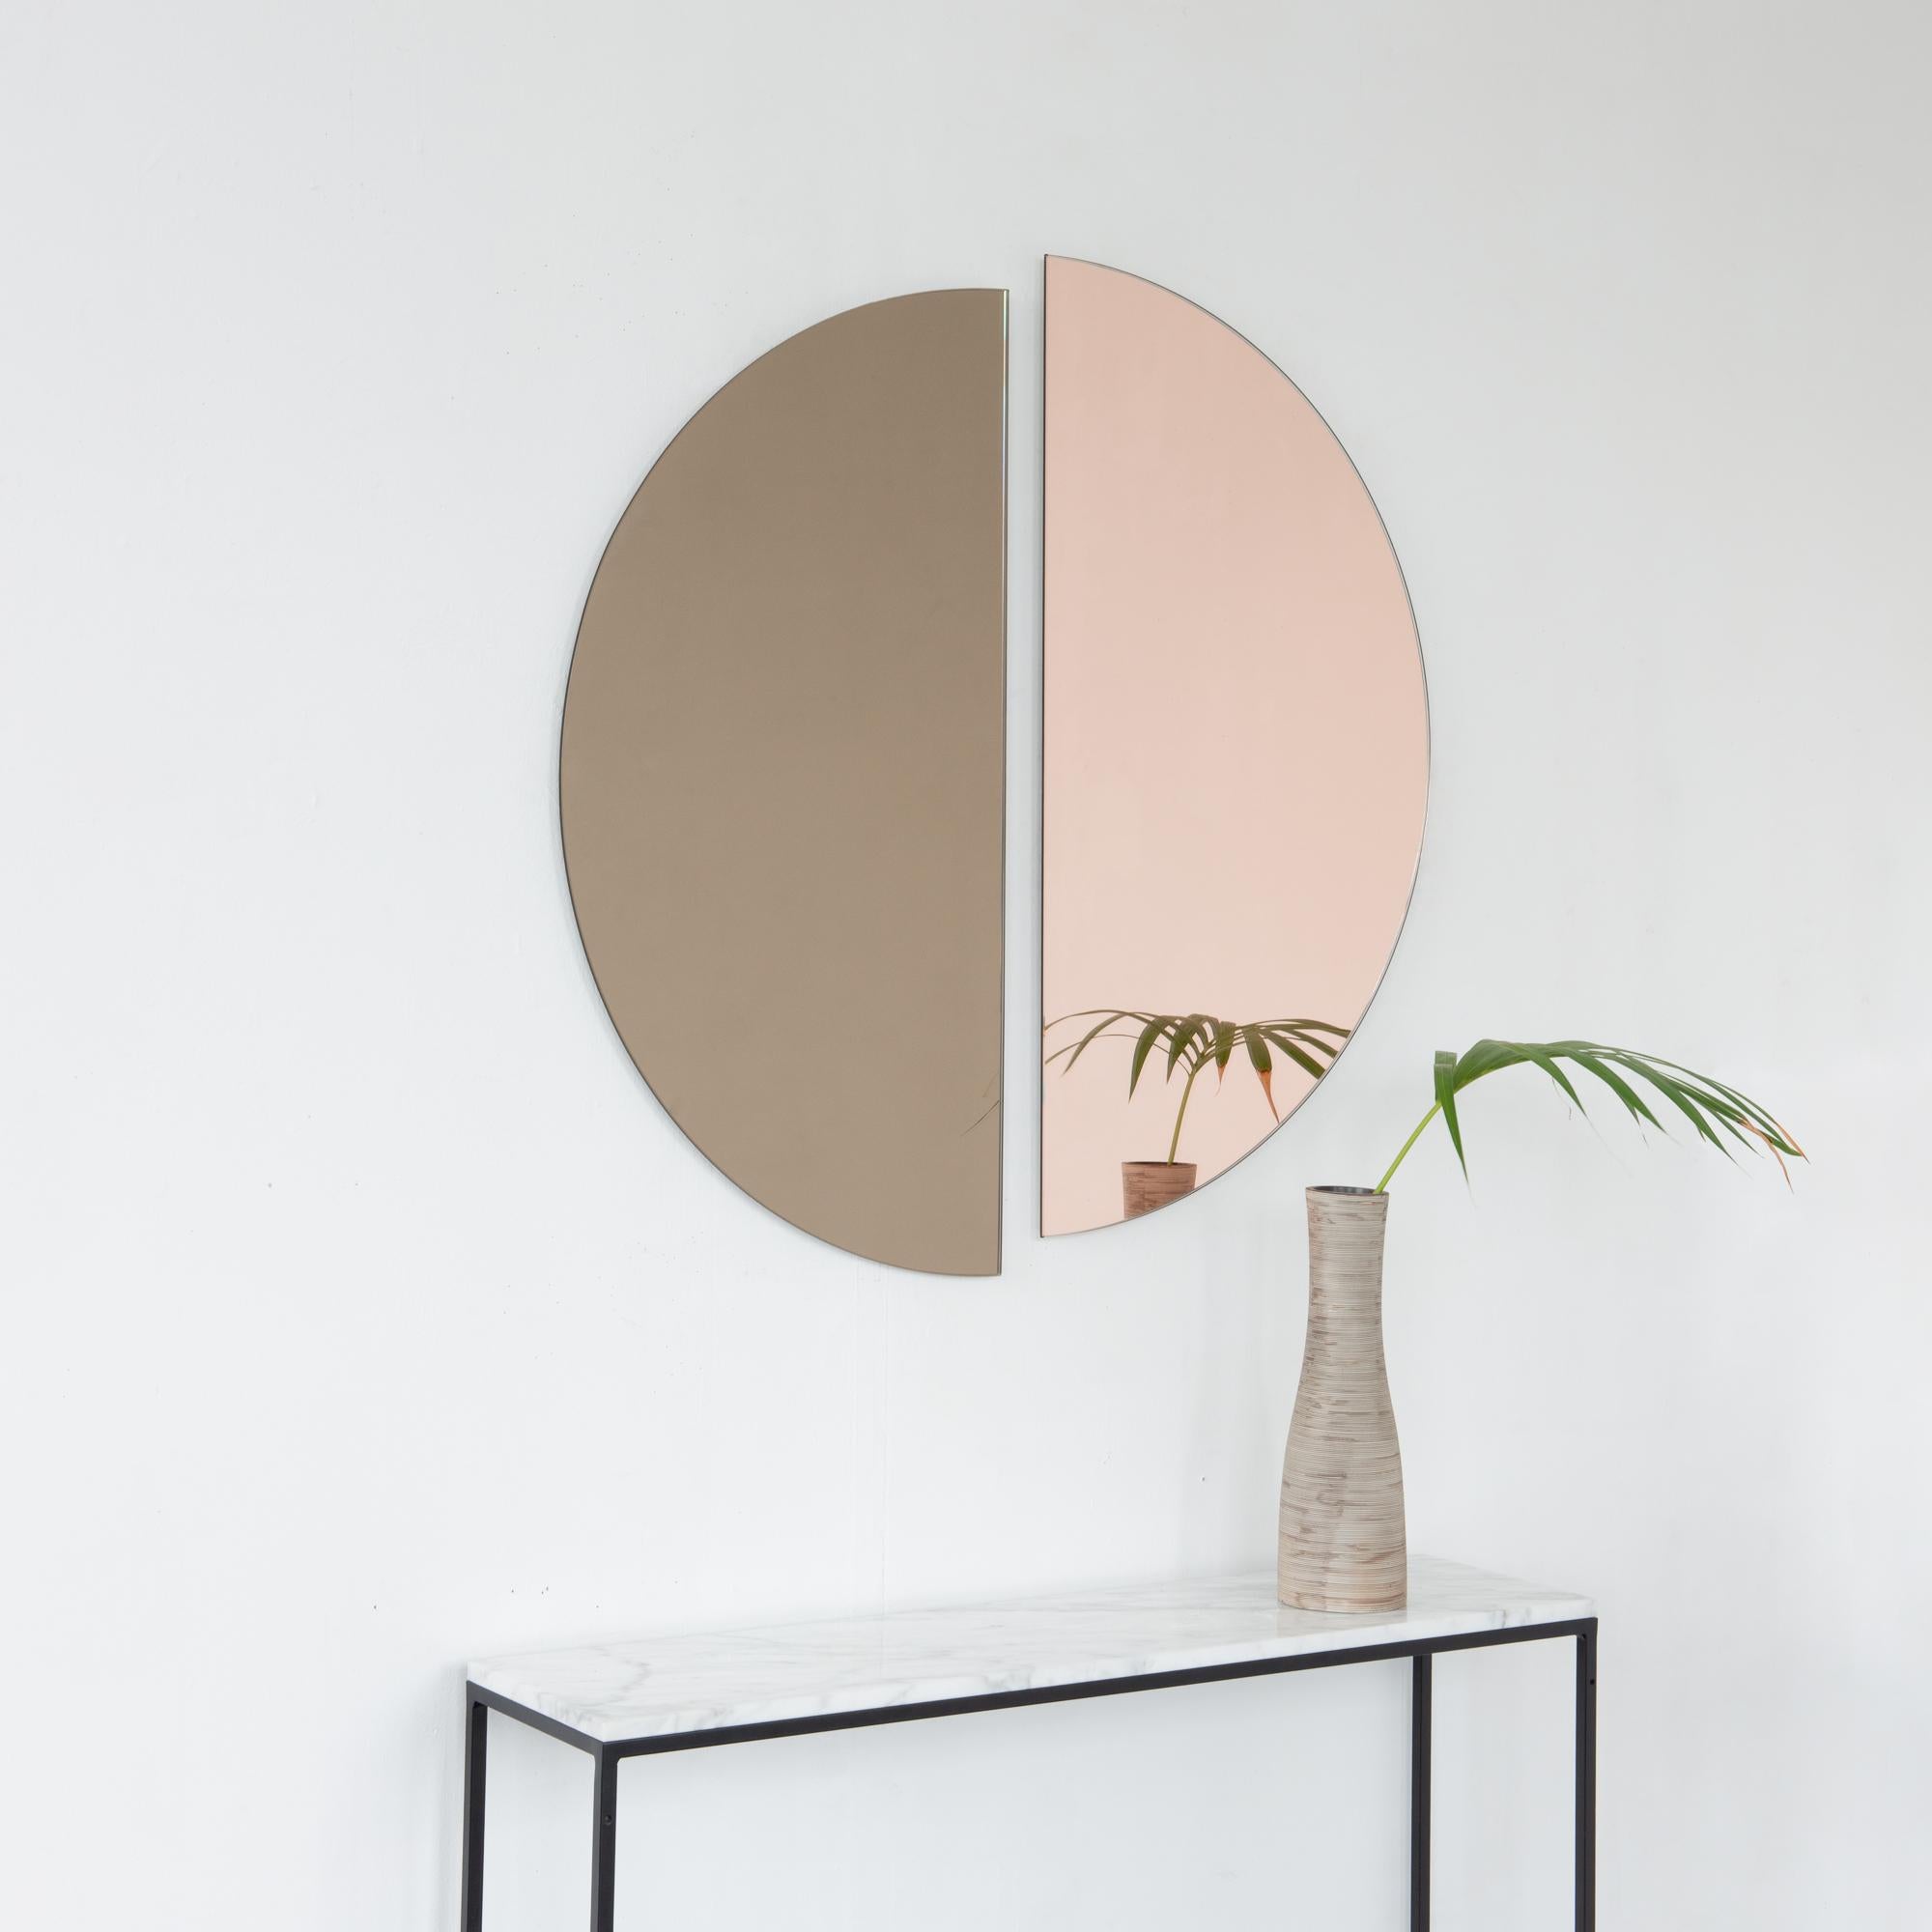 Set of two minimalist half-moon Luna™ bronze + rose gold (peach) tinted frameless mirrors with a floating effect. Fitted with a quality hanging system for a flexible installation in 4 different directions. Designed and made in London, UK. 

Our